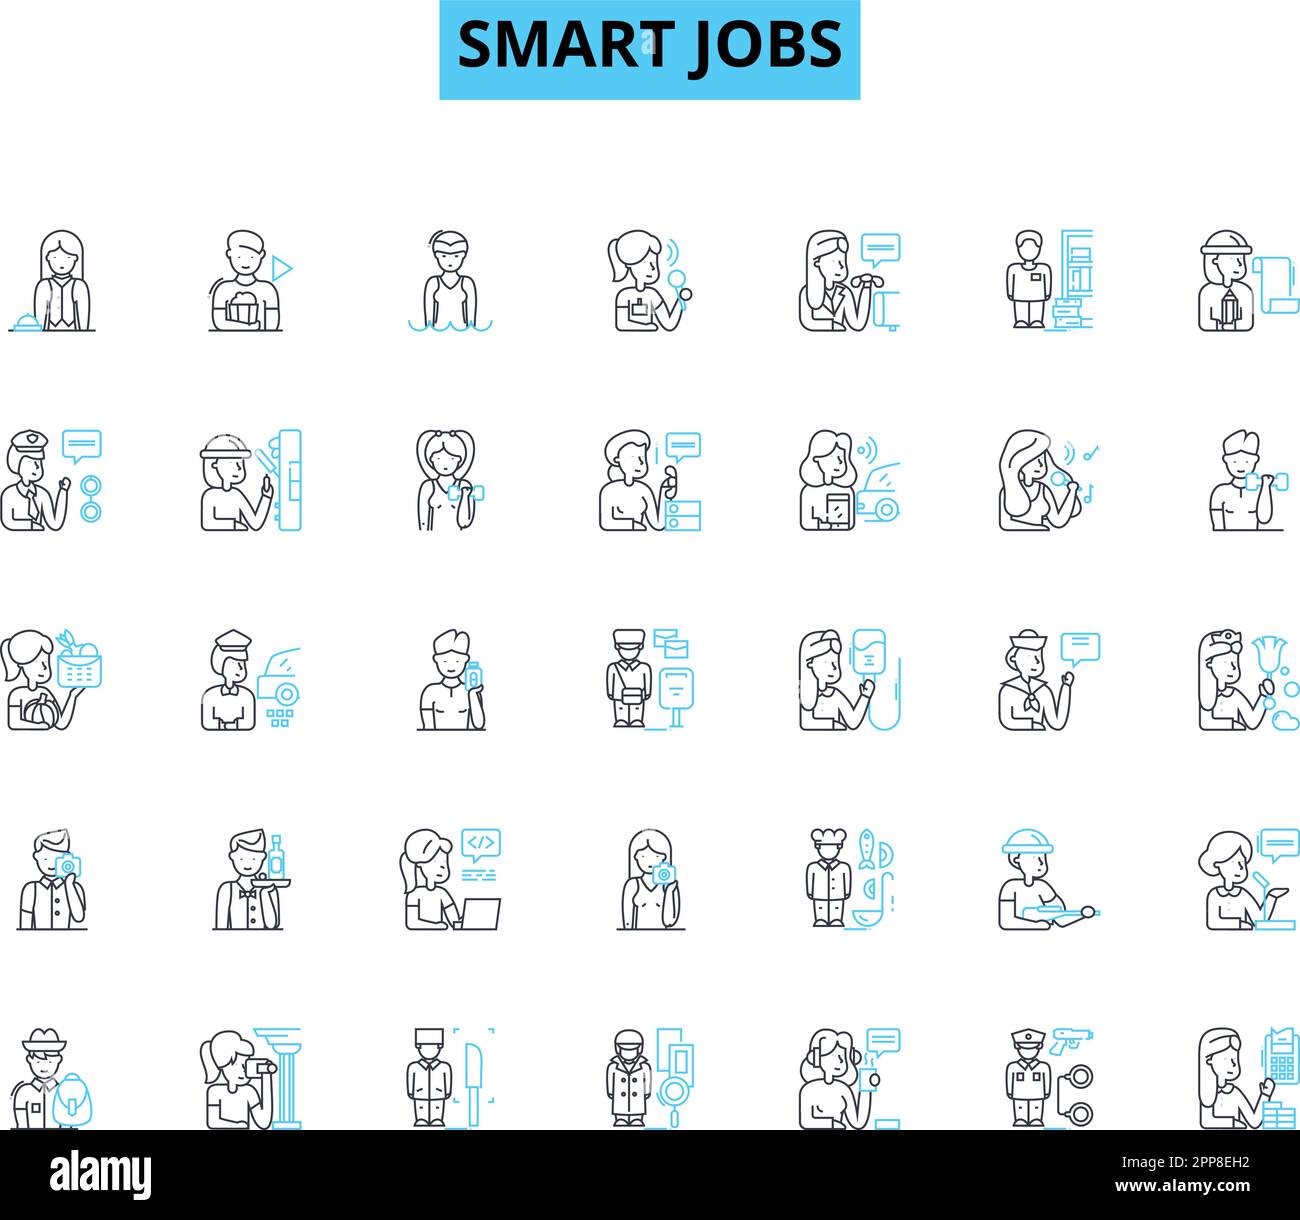 Smart jobs linear icons set. Innovation, Flexibility, Efficiency, Automation, Telecommuting, Empowerment, Digitization line vector and concept signs Stock Vector